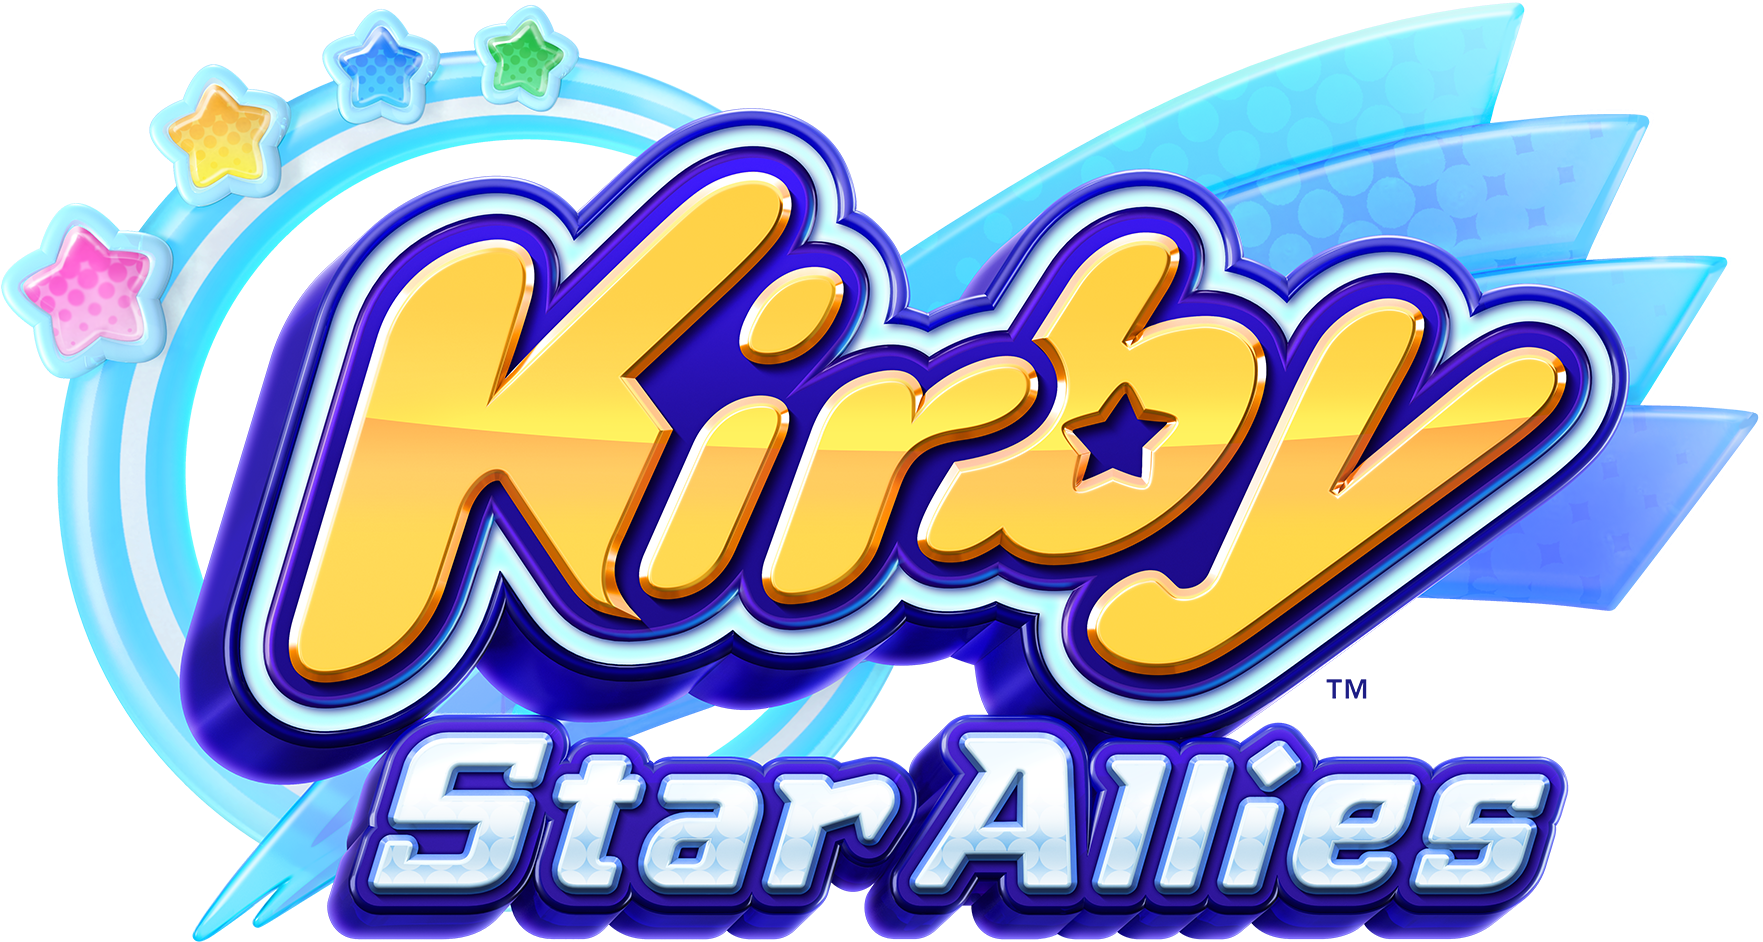 “kirby Star Allies” Preview - Kirby Star Allies Title (1920x1080)